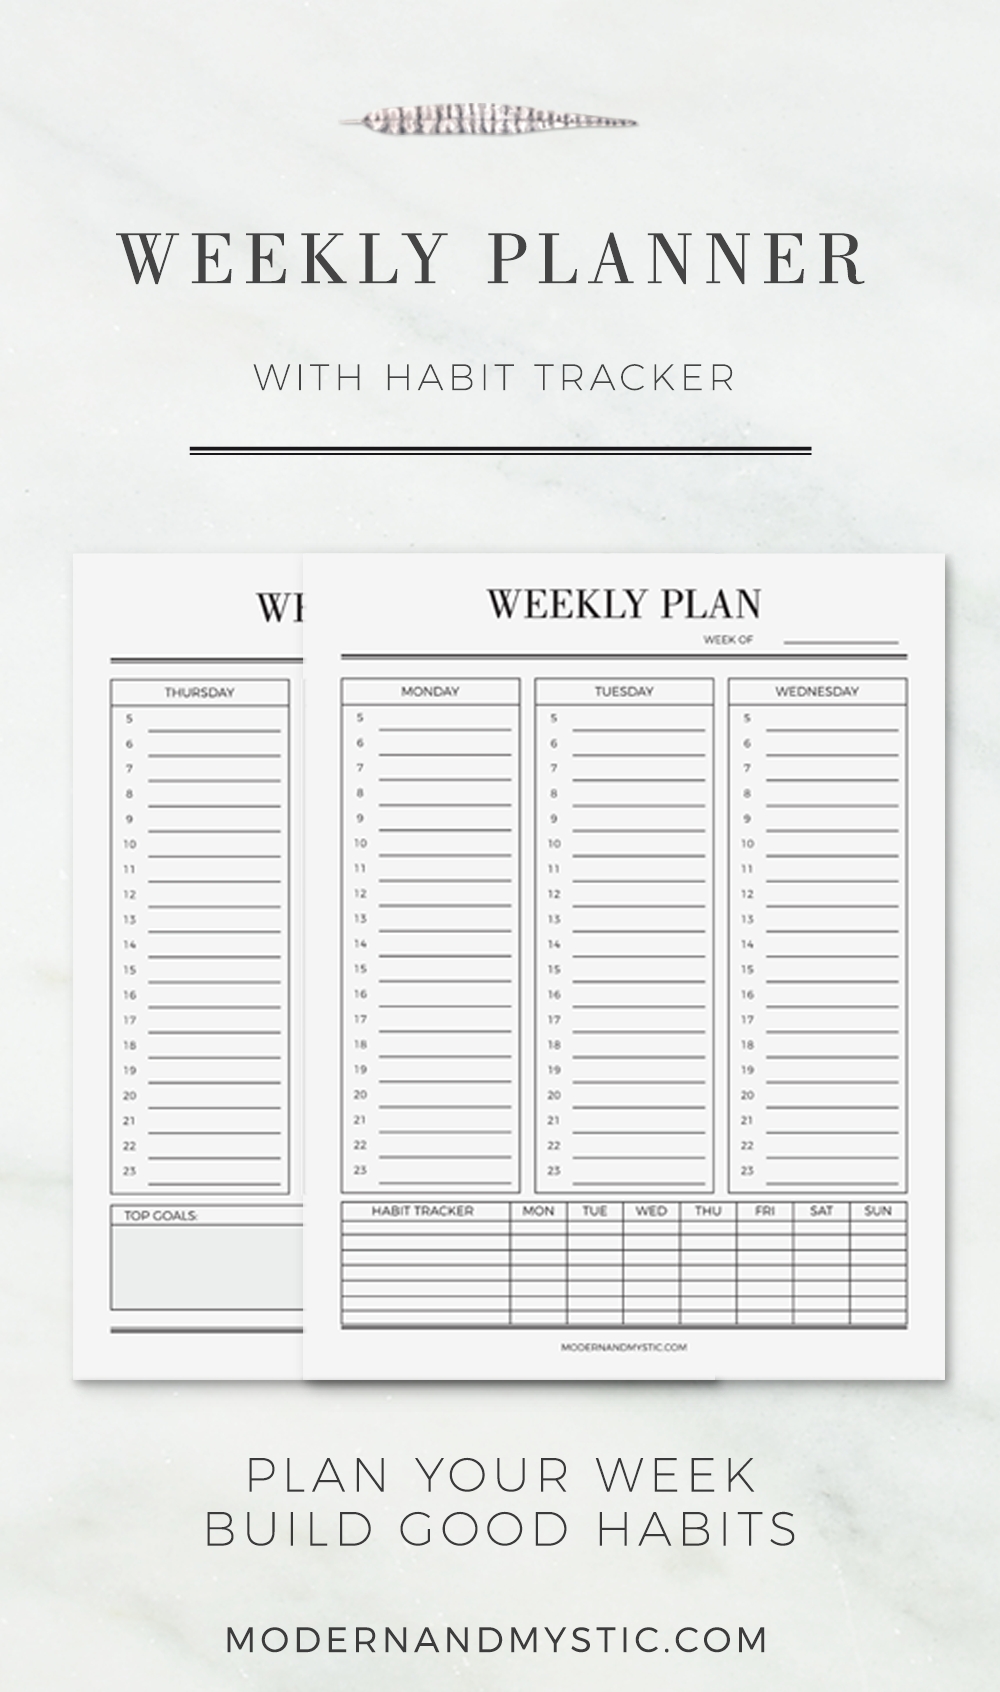 Weekly Planner And Habit Tracker Printable 7 Day Schedule